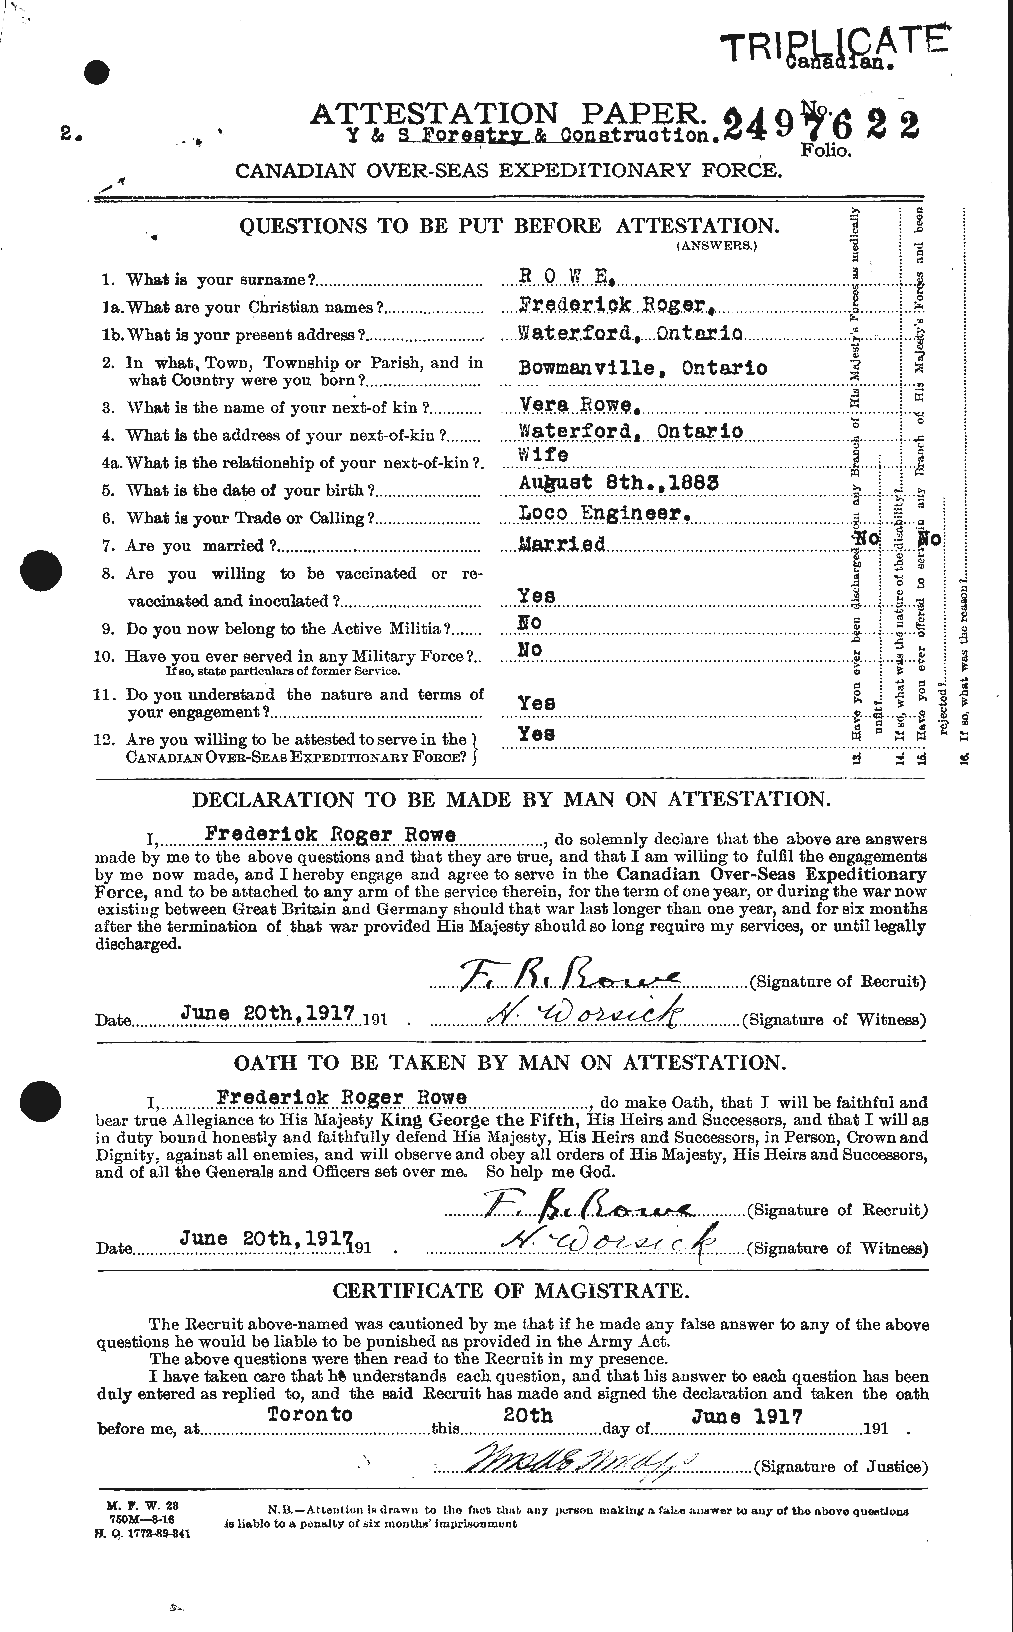 Personnel Records of the First World War - CEF 615866a